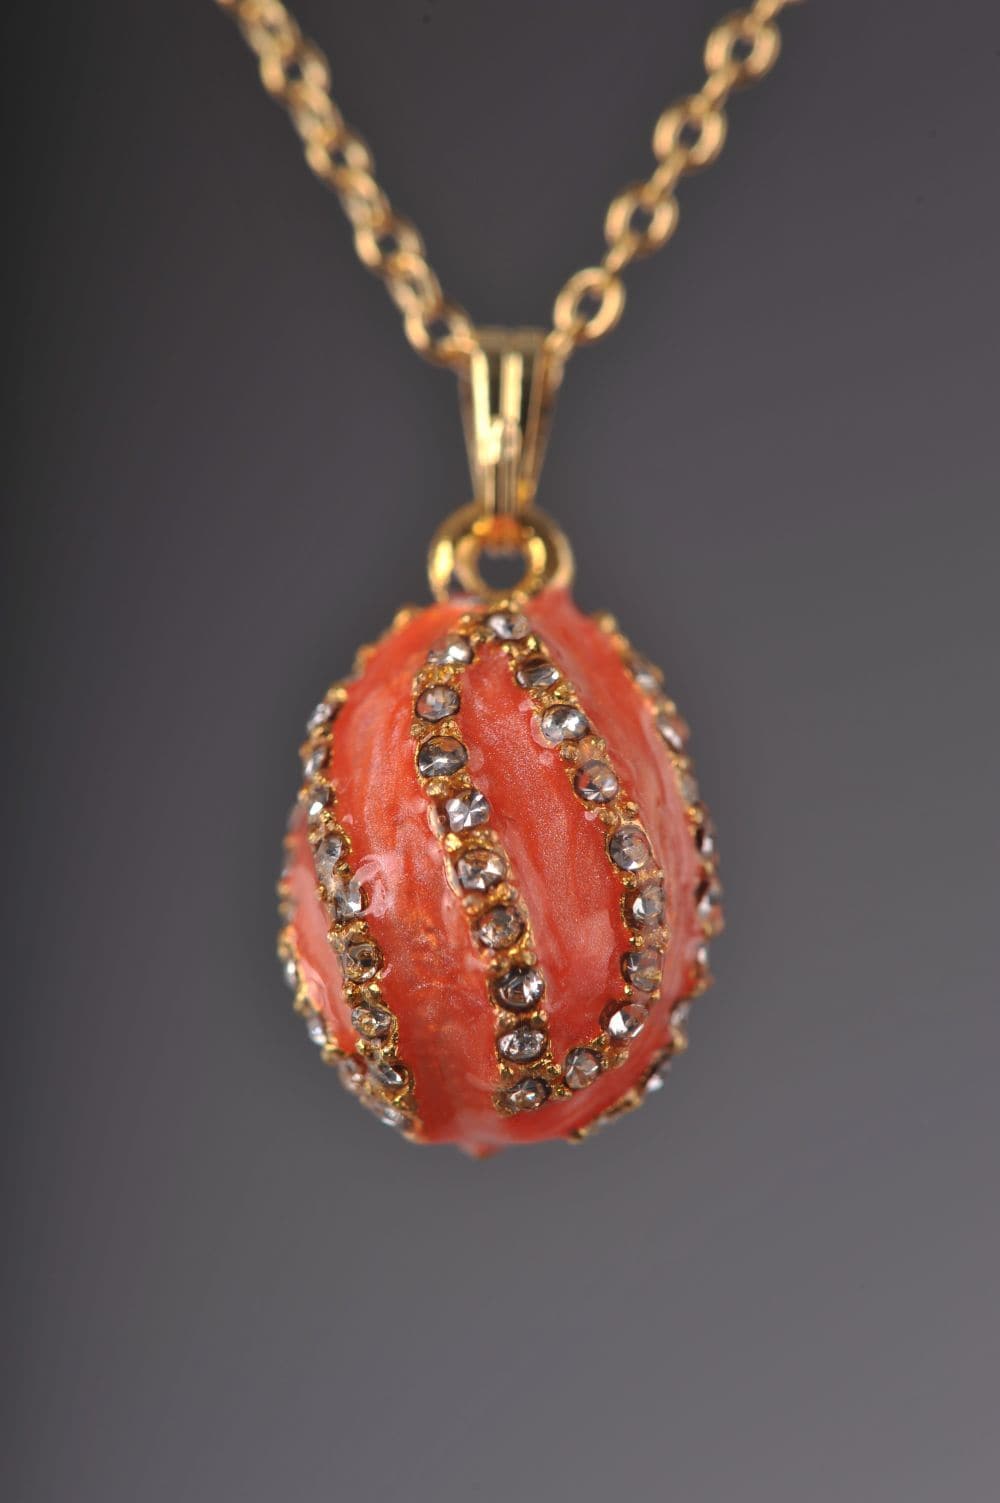 Salmon Spiral Egg Pendant Necklace - Treasures of my HeART